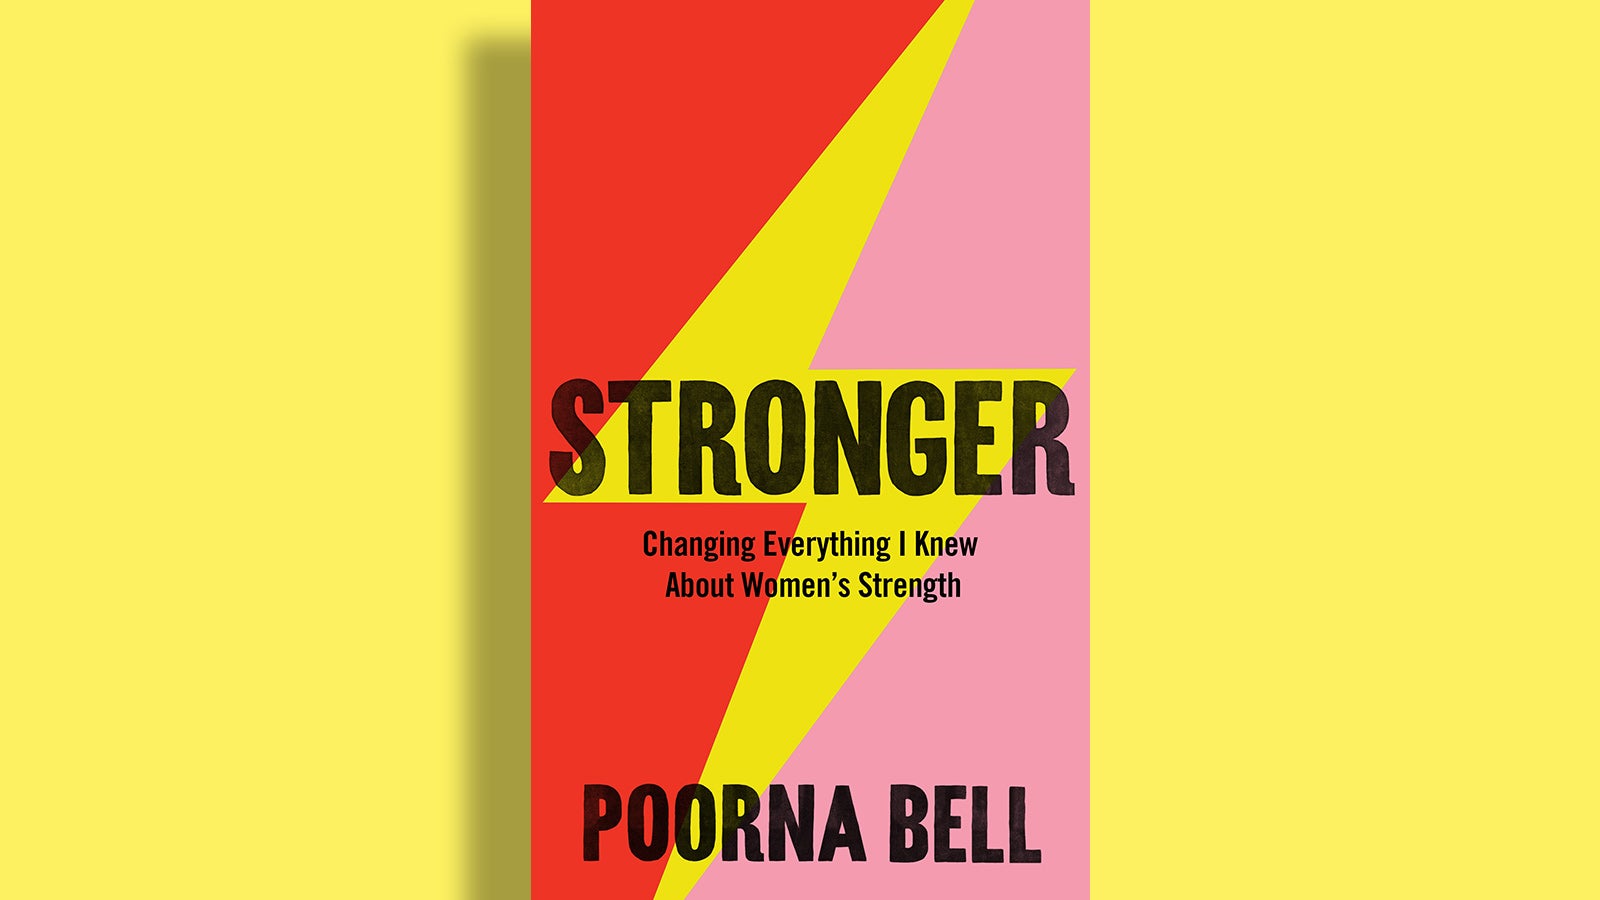 Poorna Bell's Stronger  book cover against a yellow background